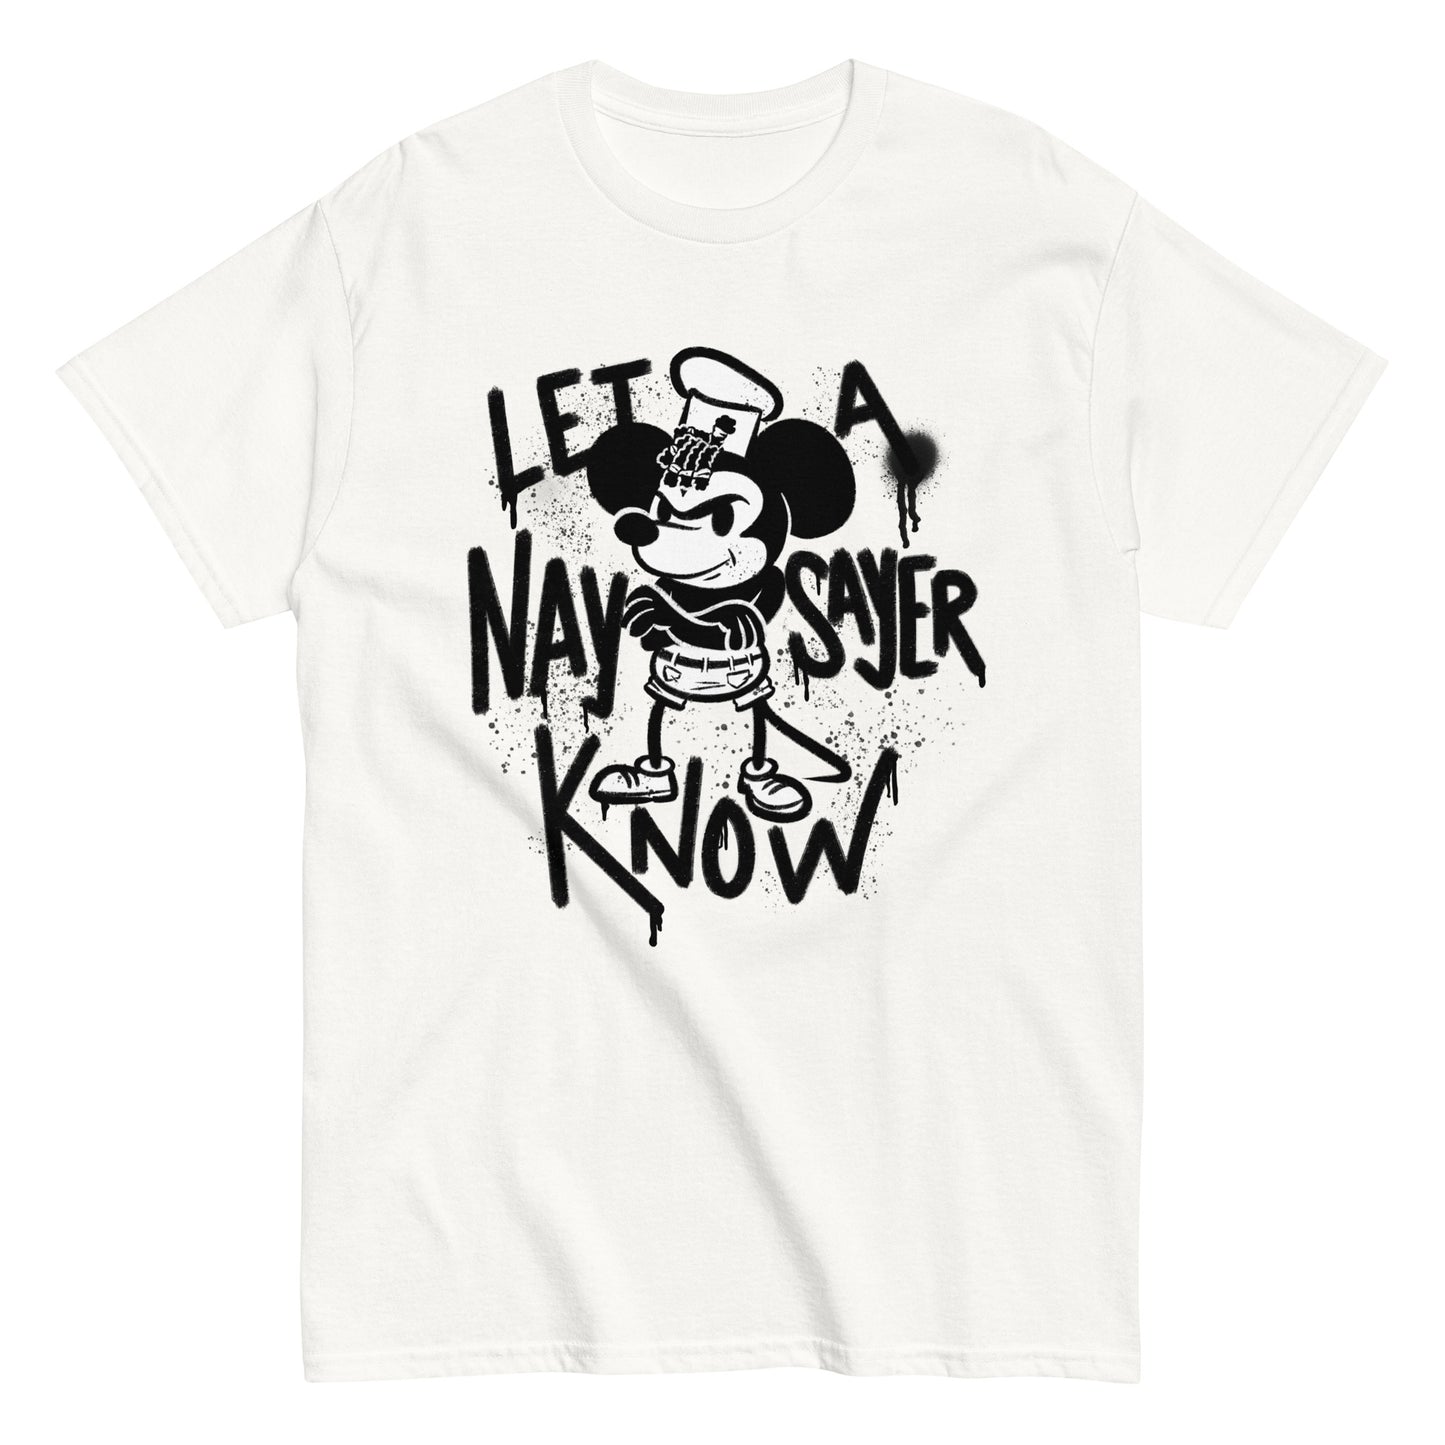 Steamboat Willie - Let a Naysayer Know T-shirt Funny Meme Classic Cartoons